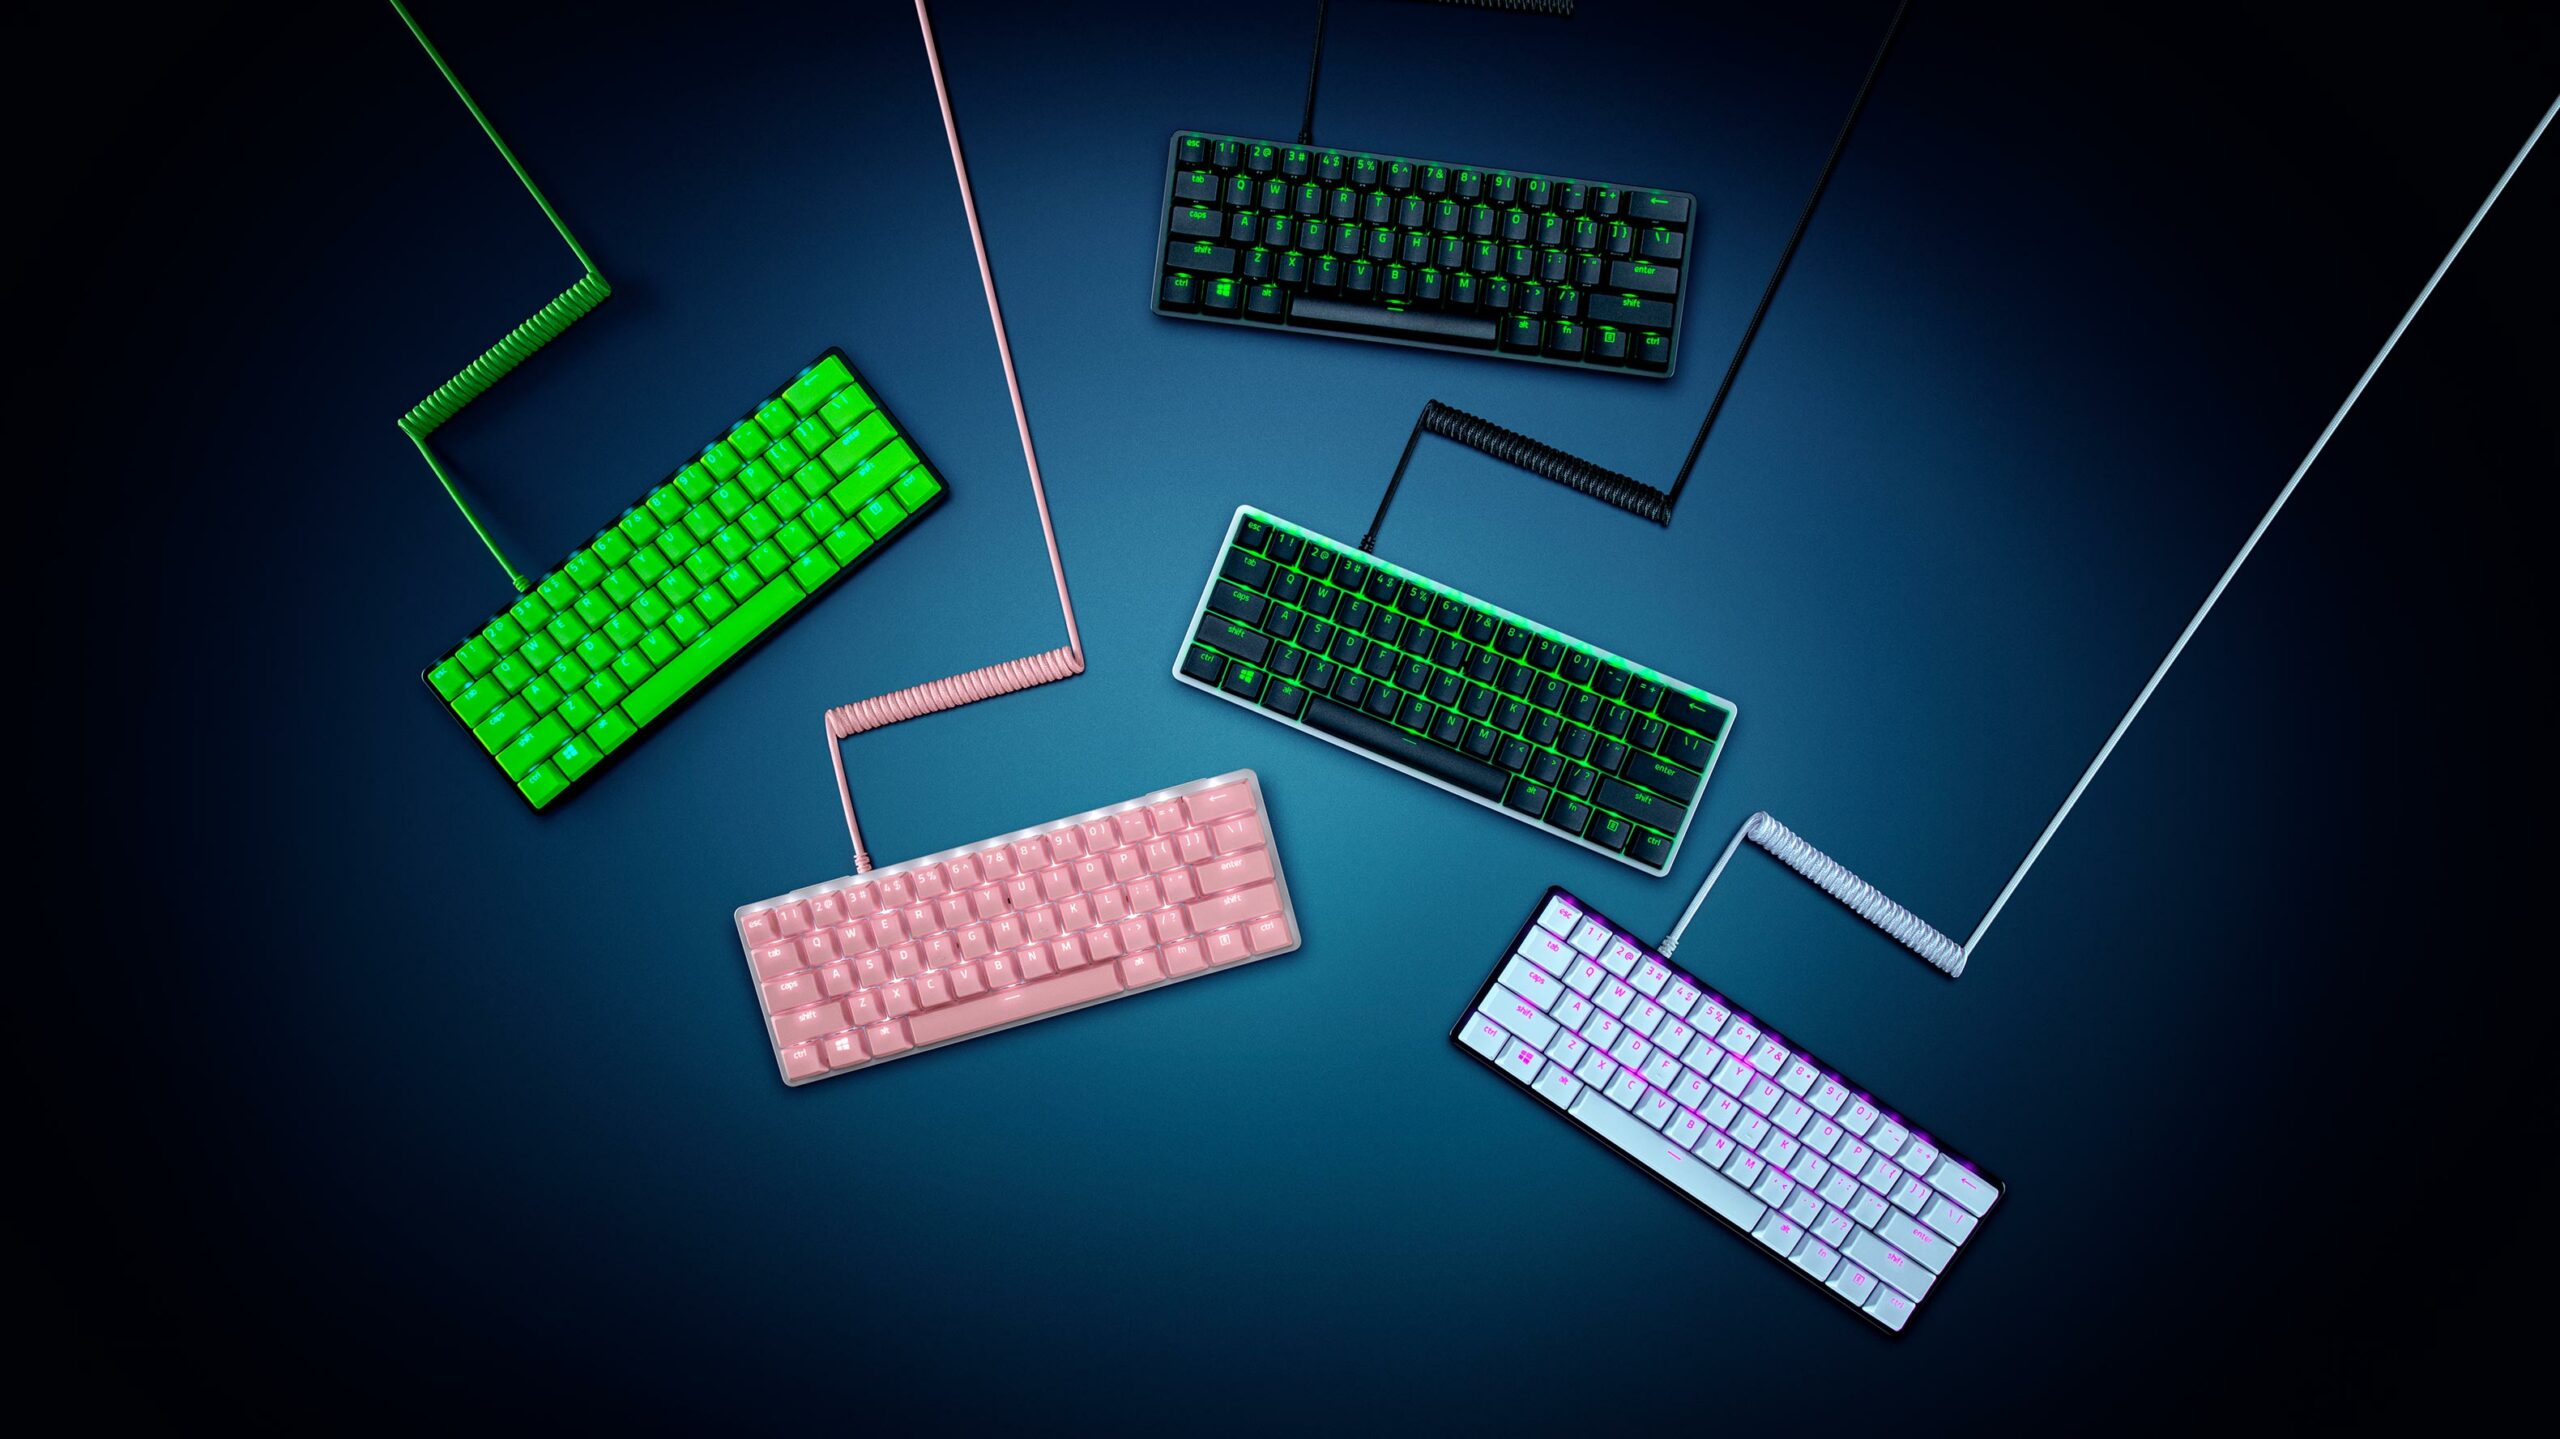 Spectaculair Overeenkomstig met Verdeel Razer's new keyboard accessories include PBT keycaps, coiled cables and more